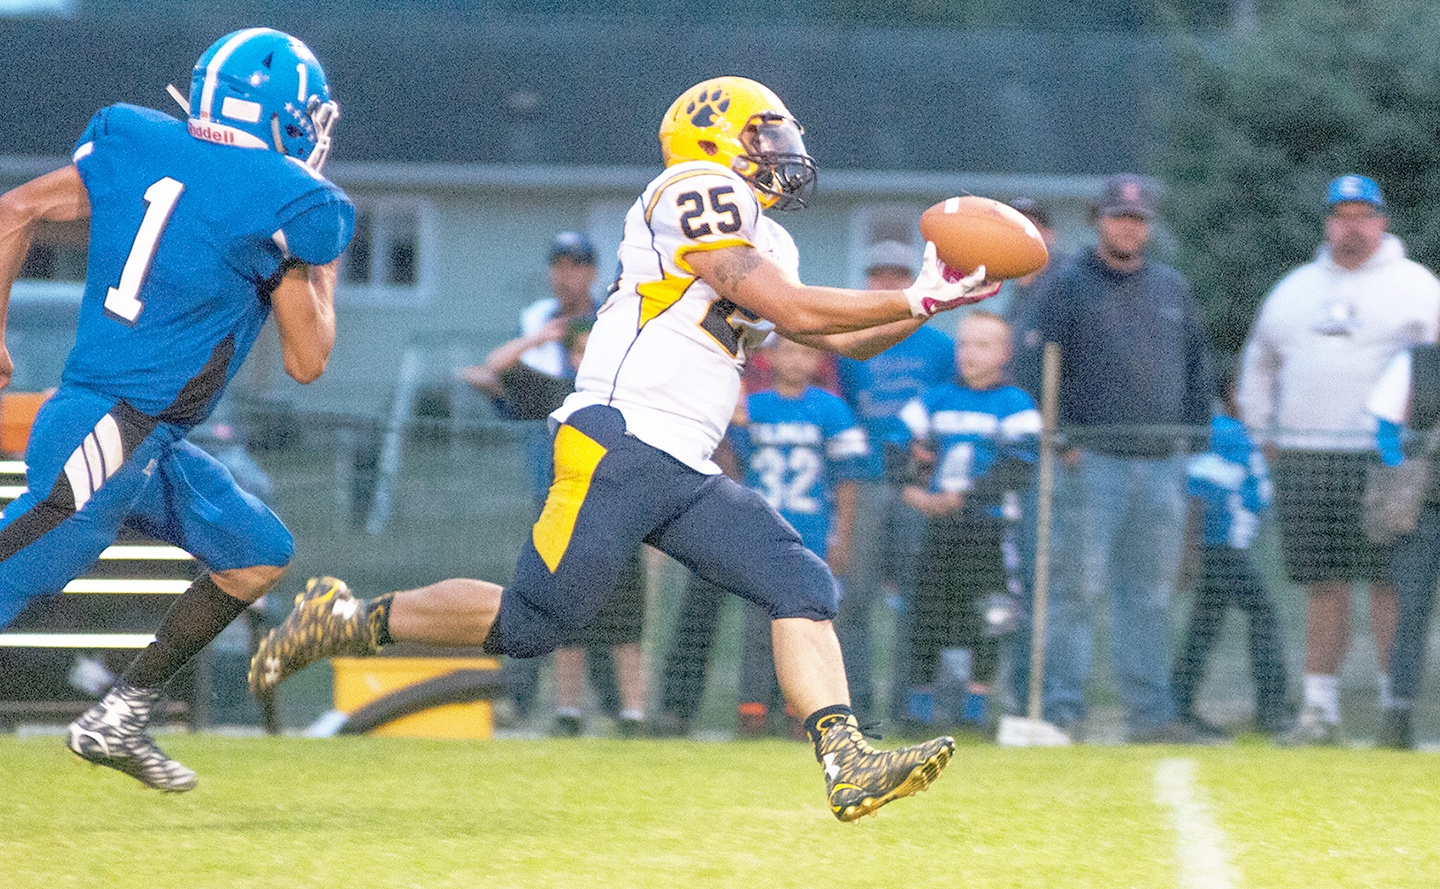 AHS finds the golden Touch against Elma, 48-20